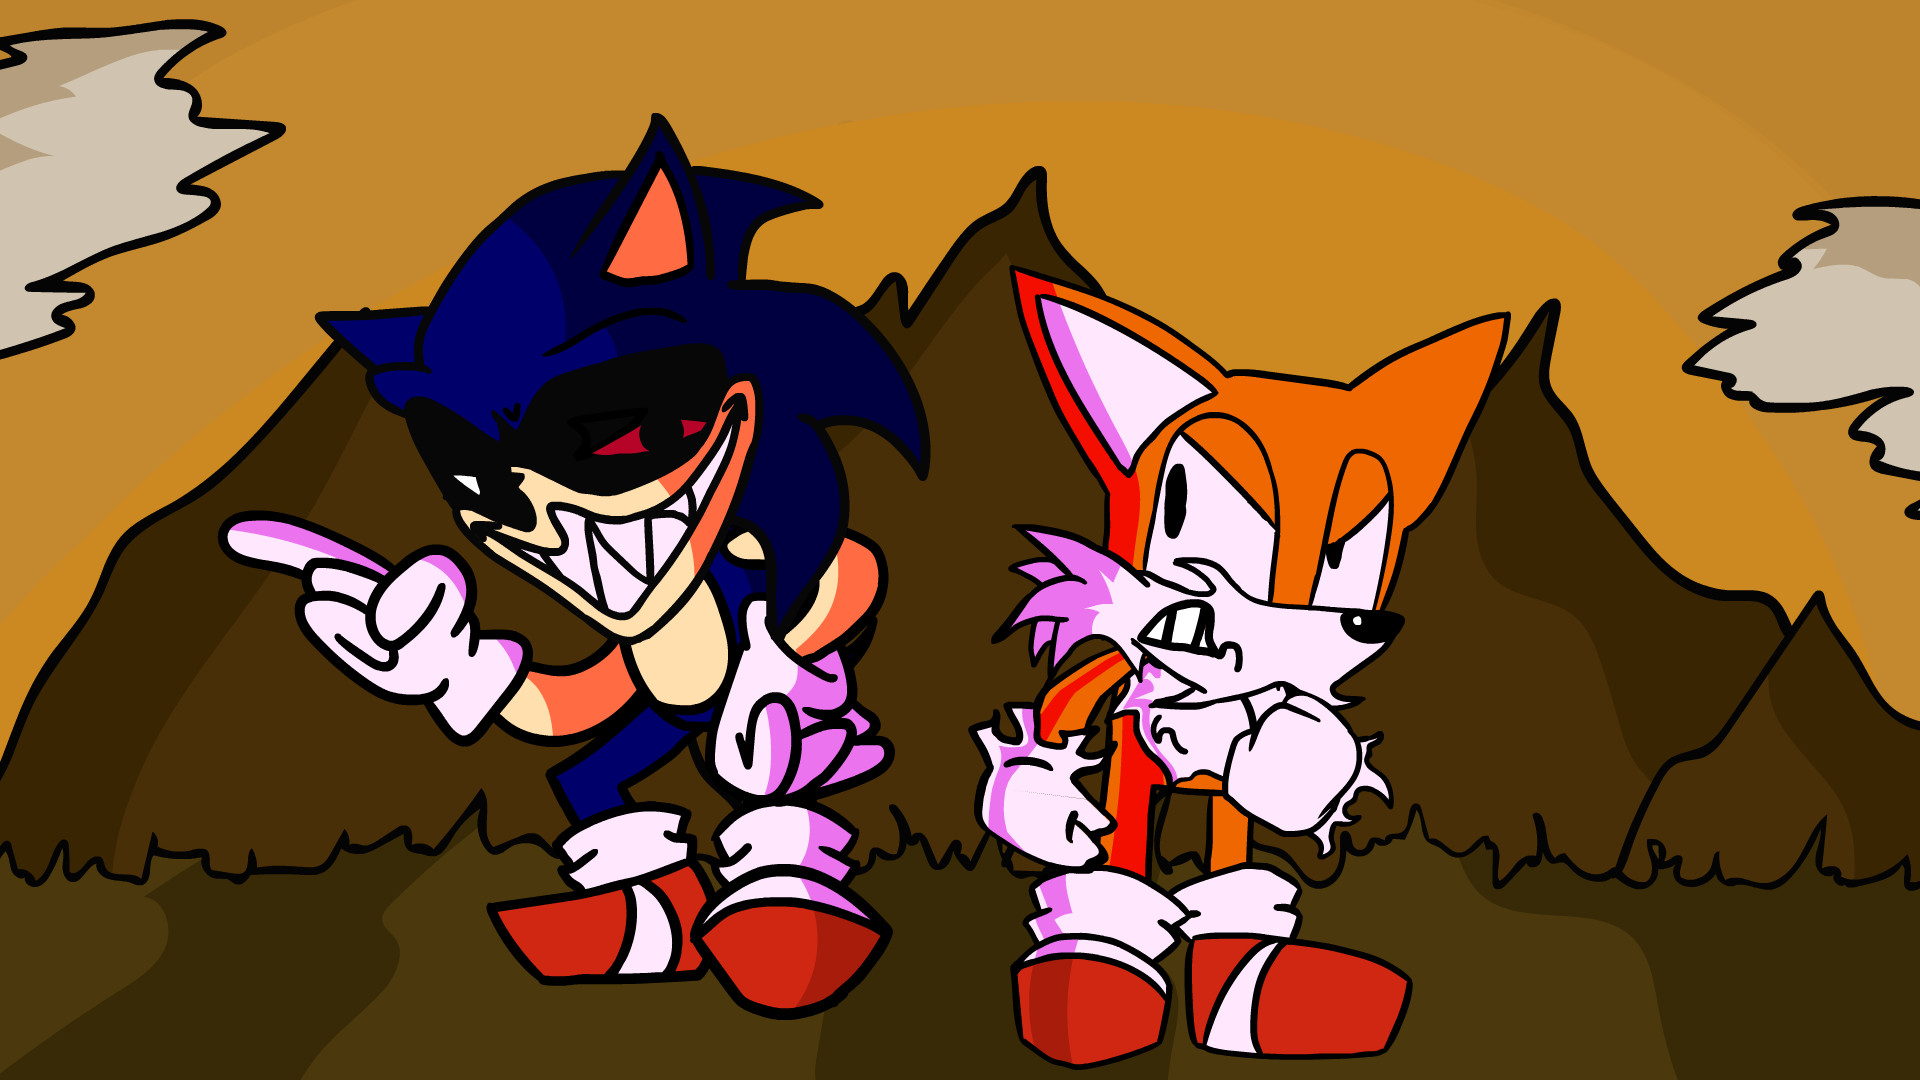 Tails and Tails.exe, The chat